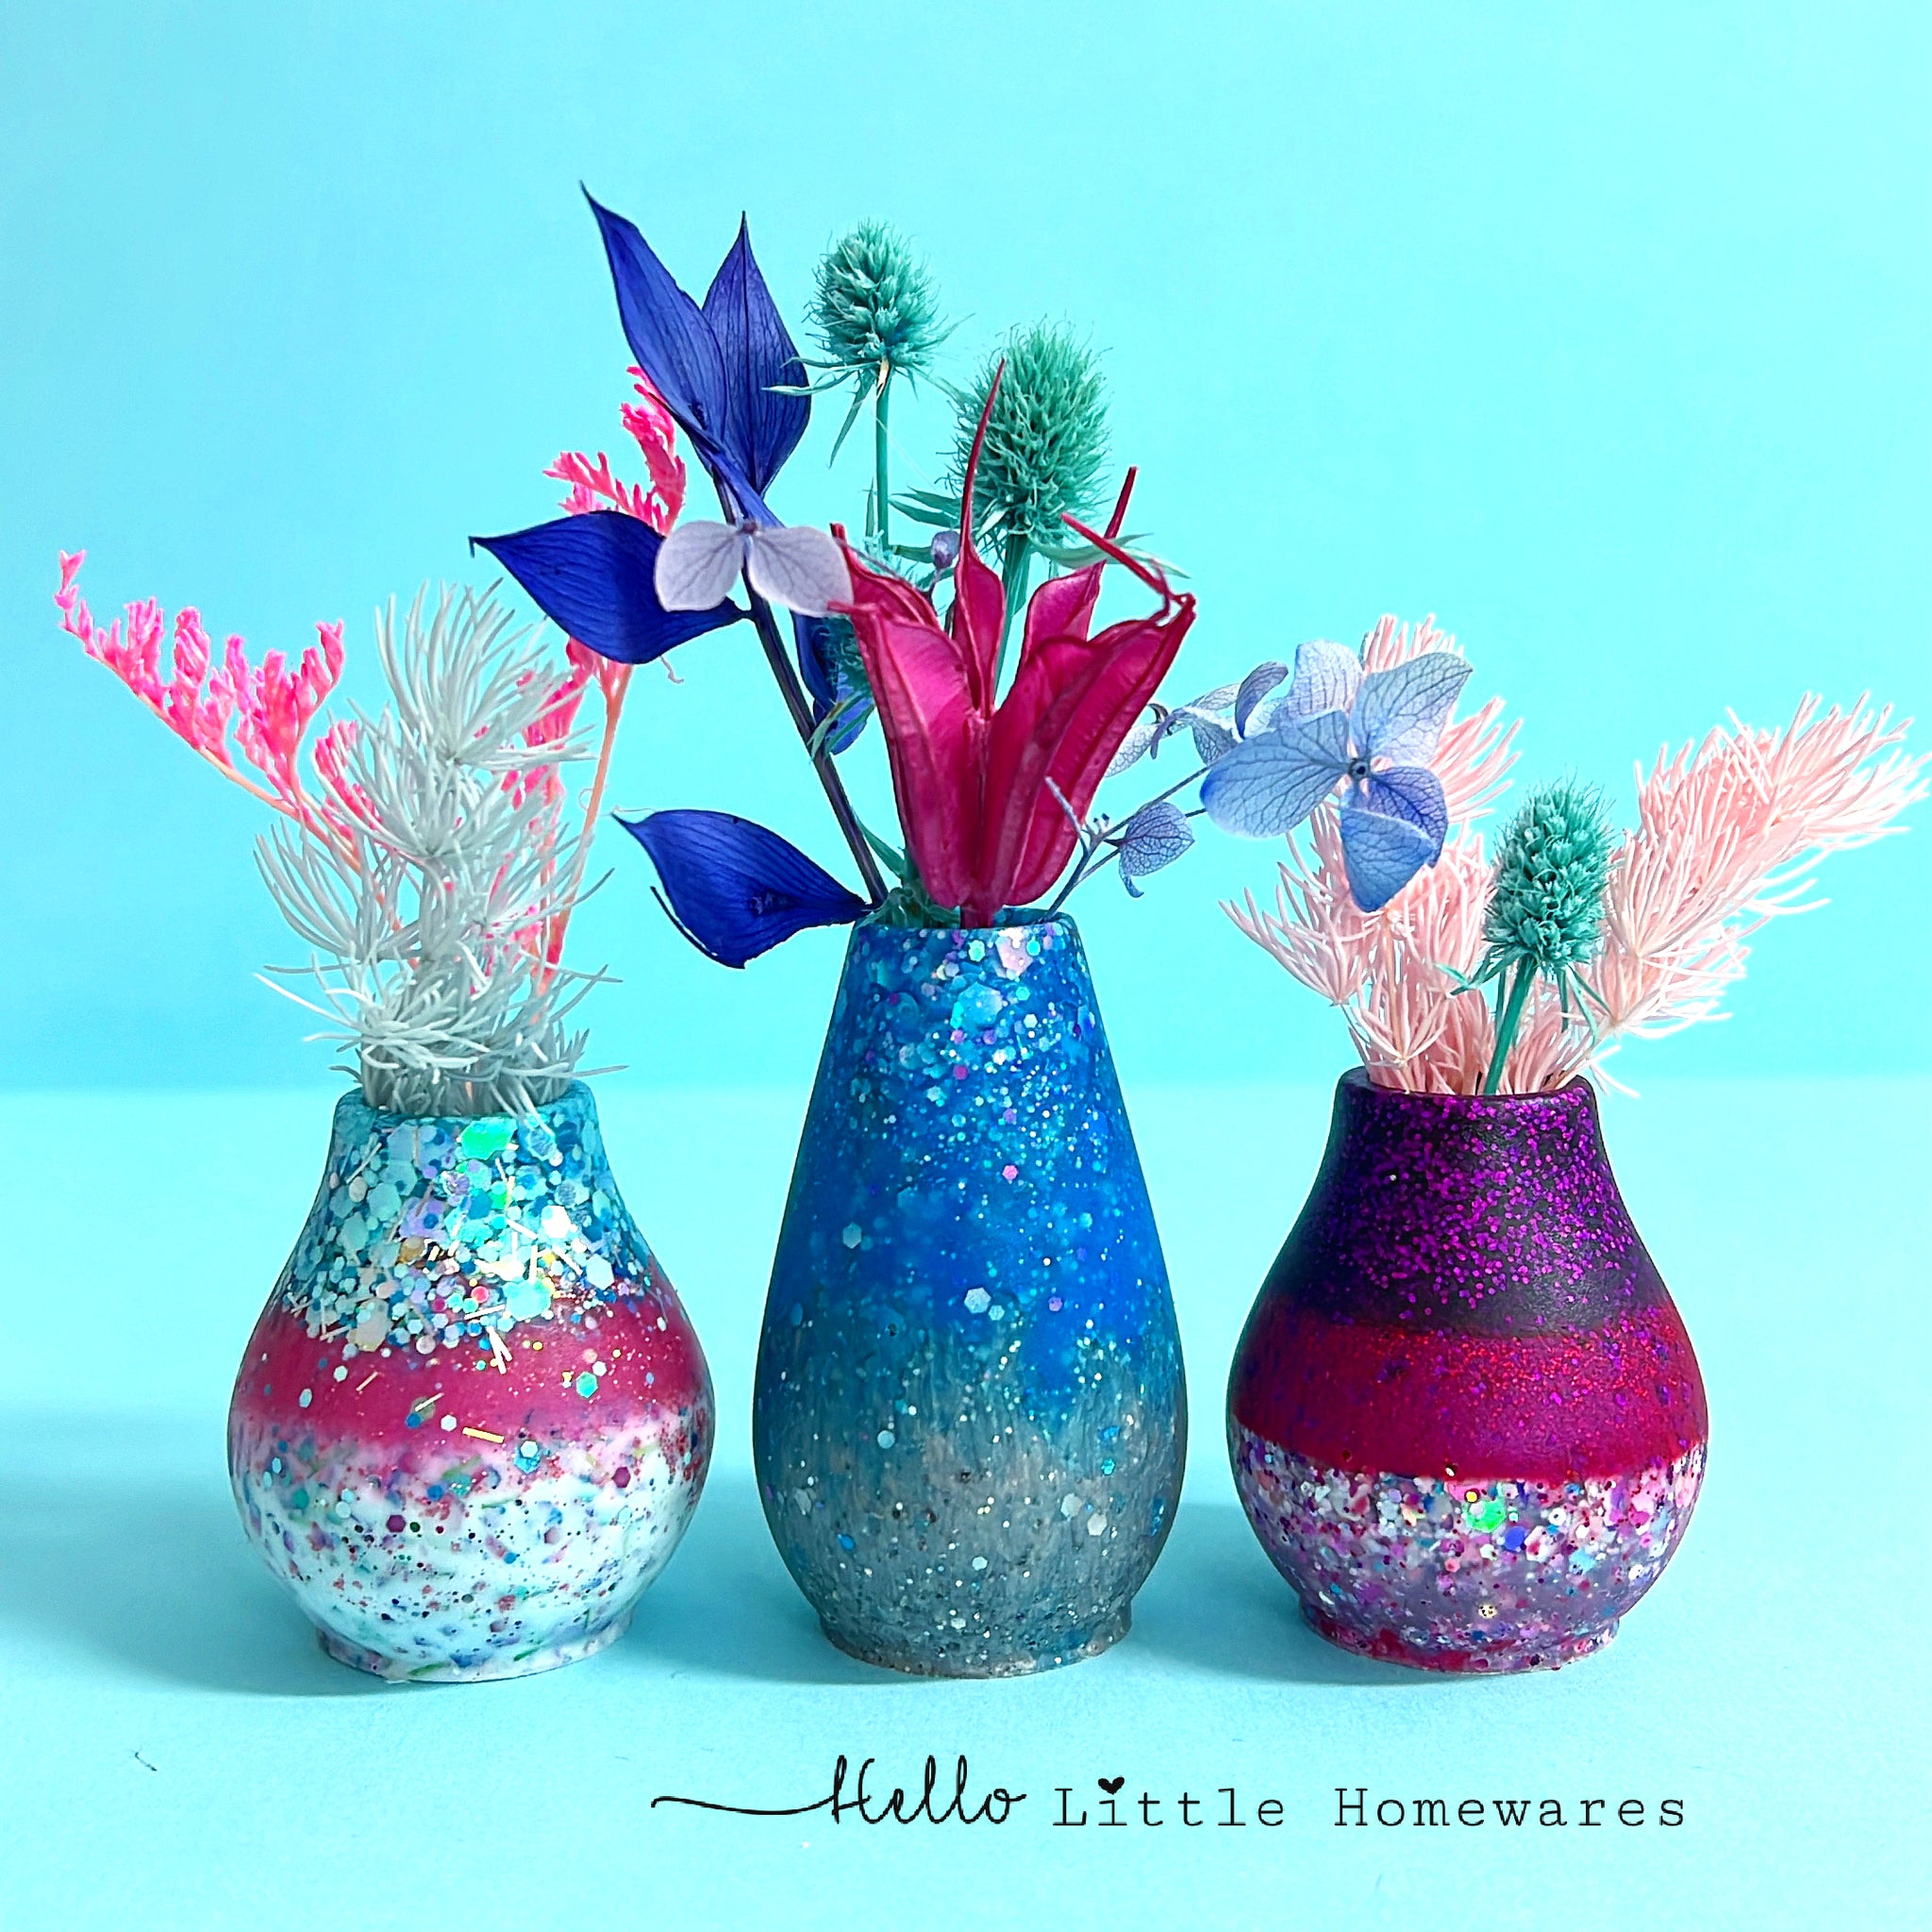 HELLO BABY BUD VASES : Choose your design : One of a Kind Cast Resin Vases